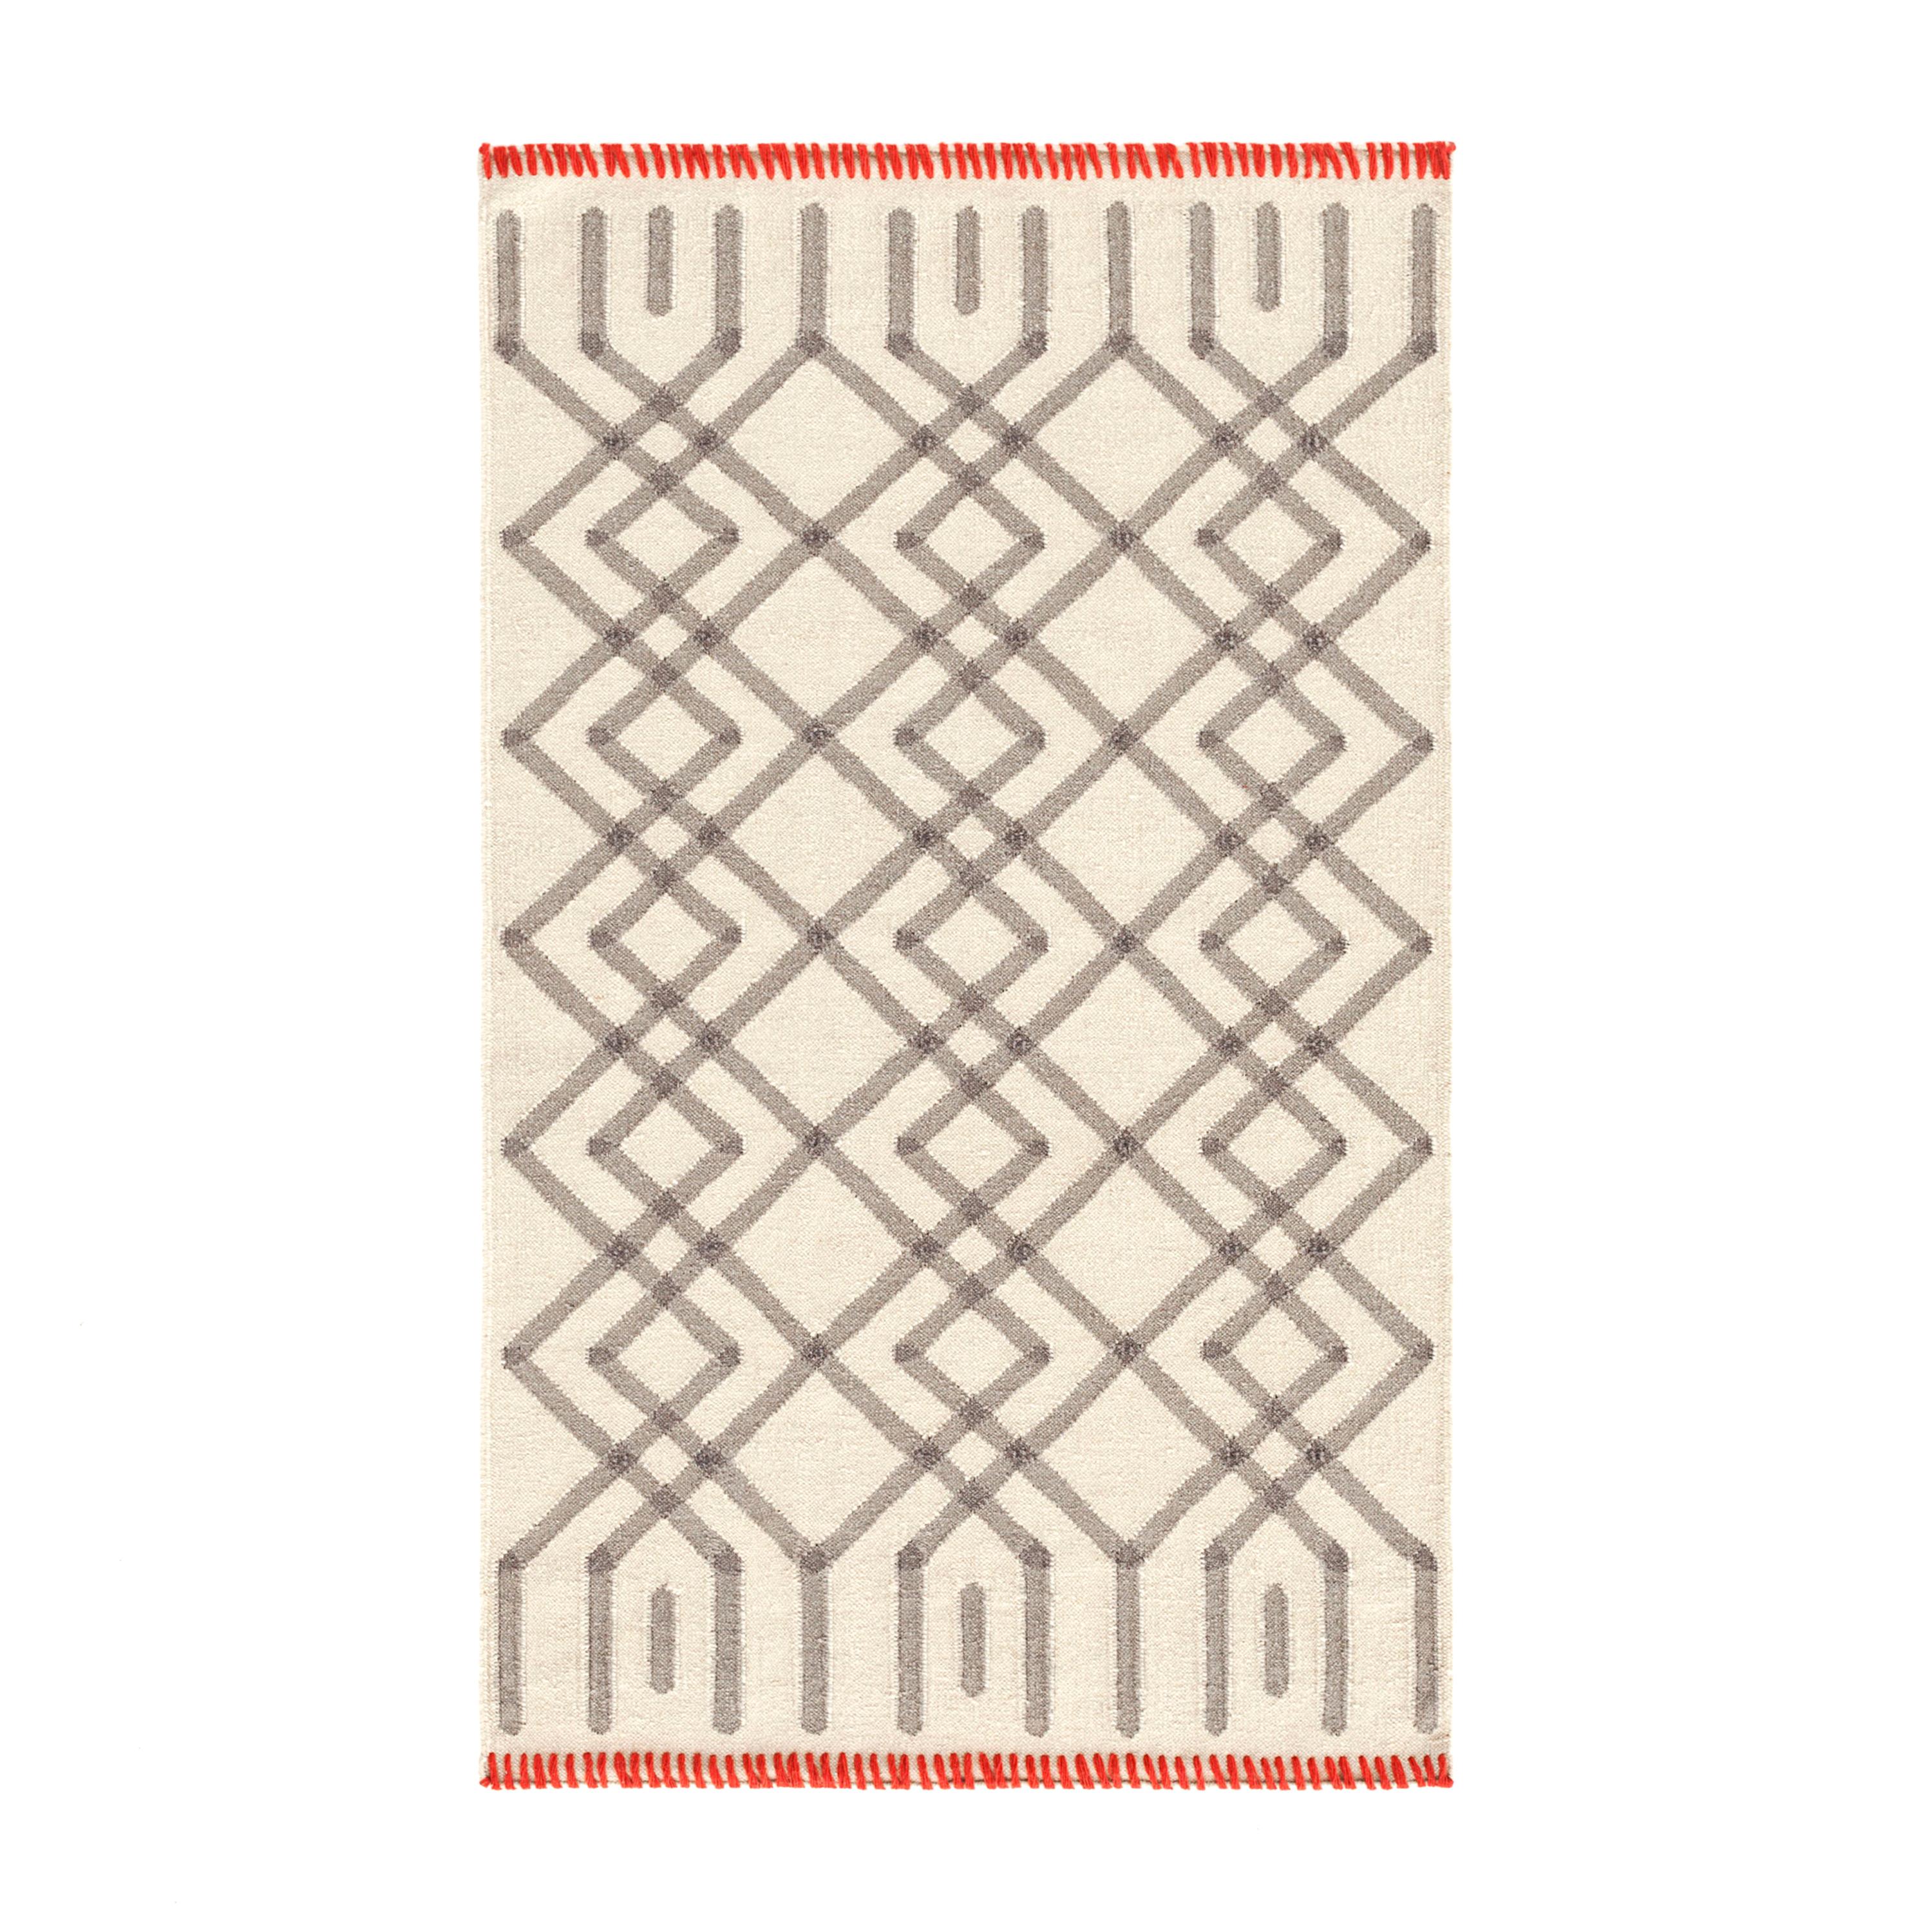 GAN Duna Small Rug in Beige and Gray Wool by Odosdesign